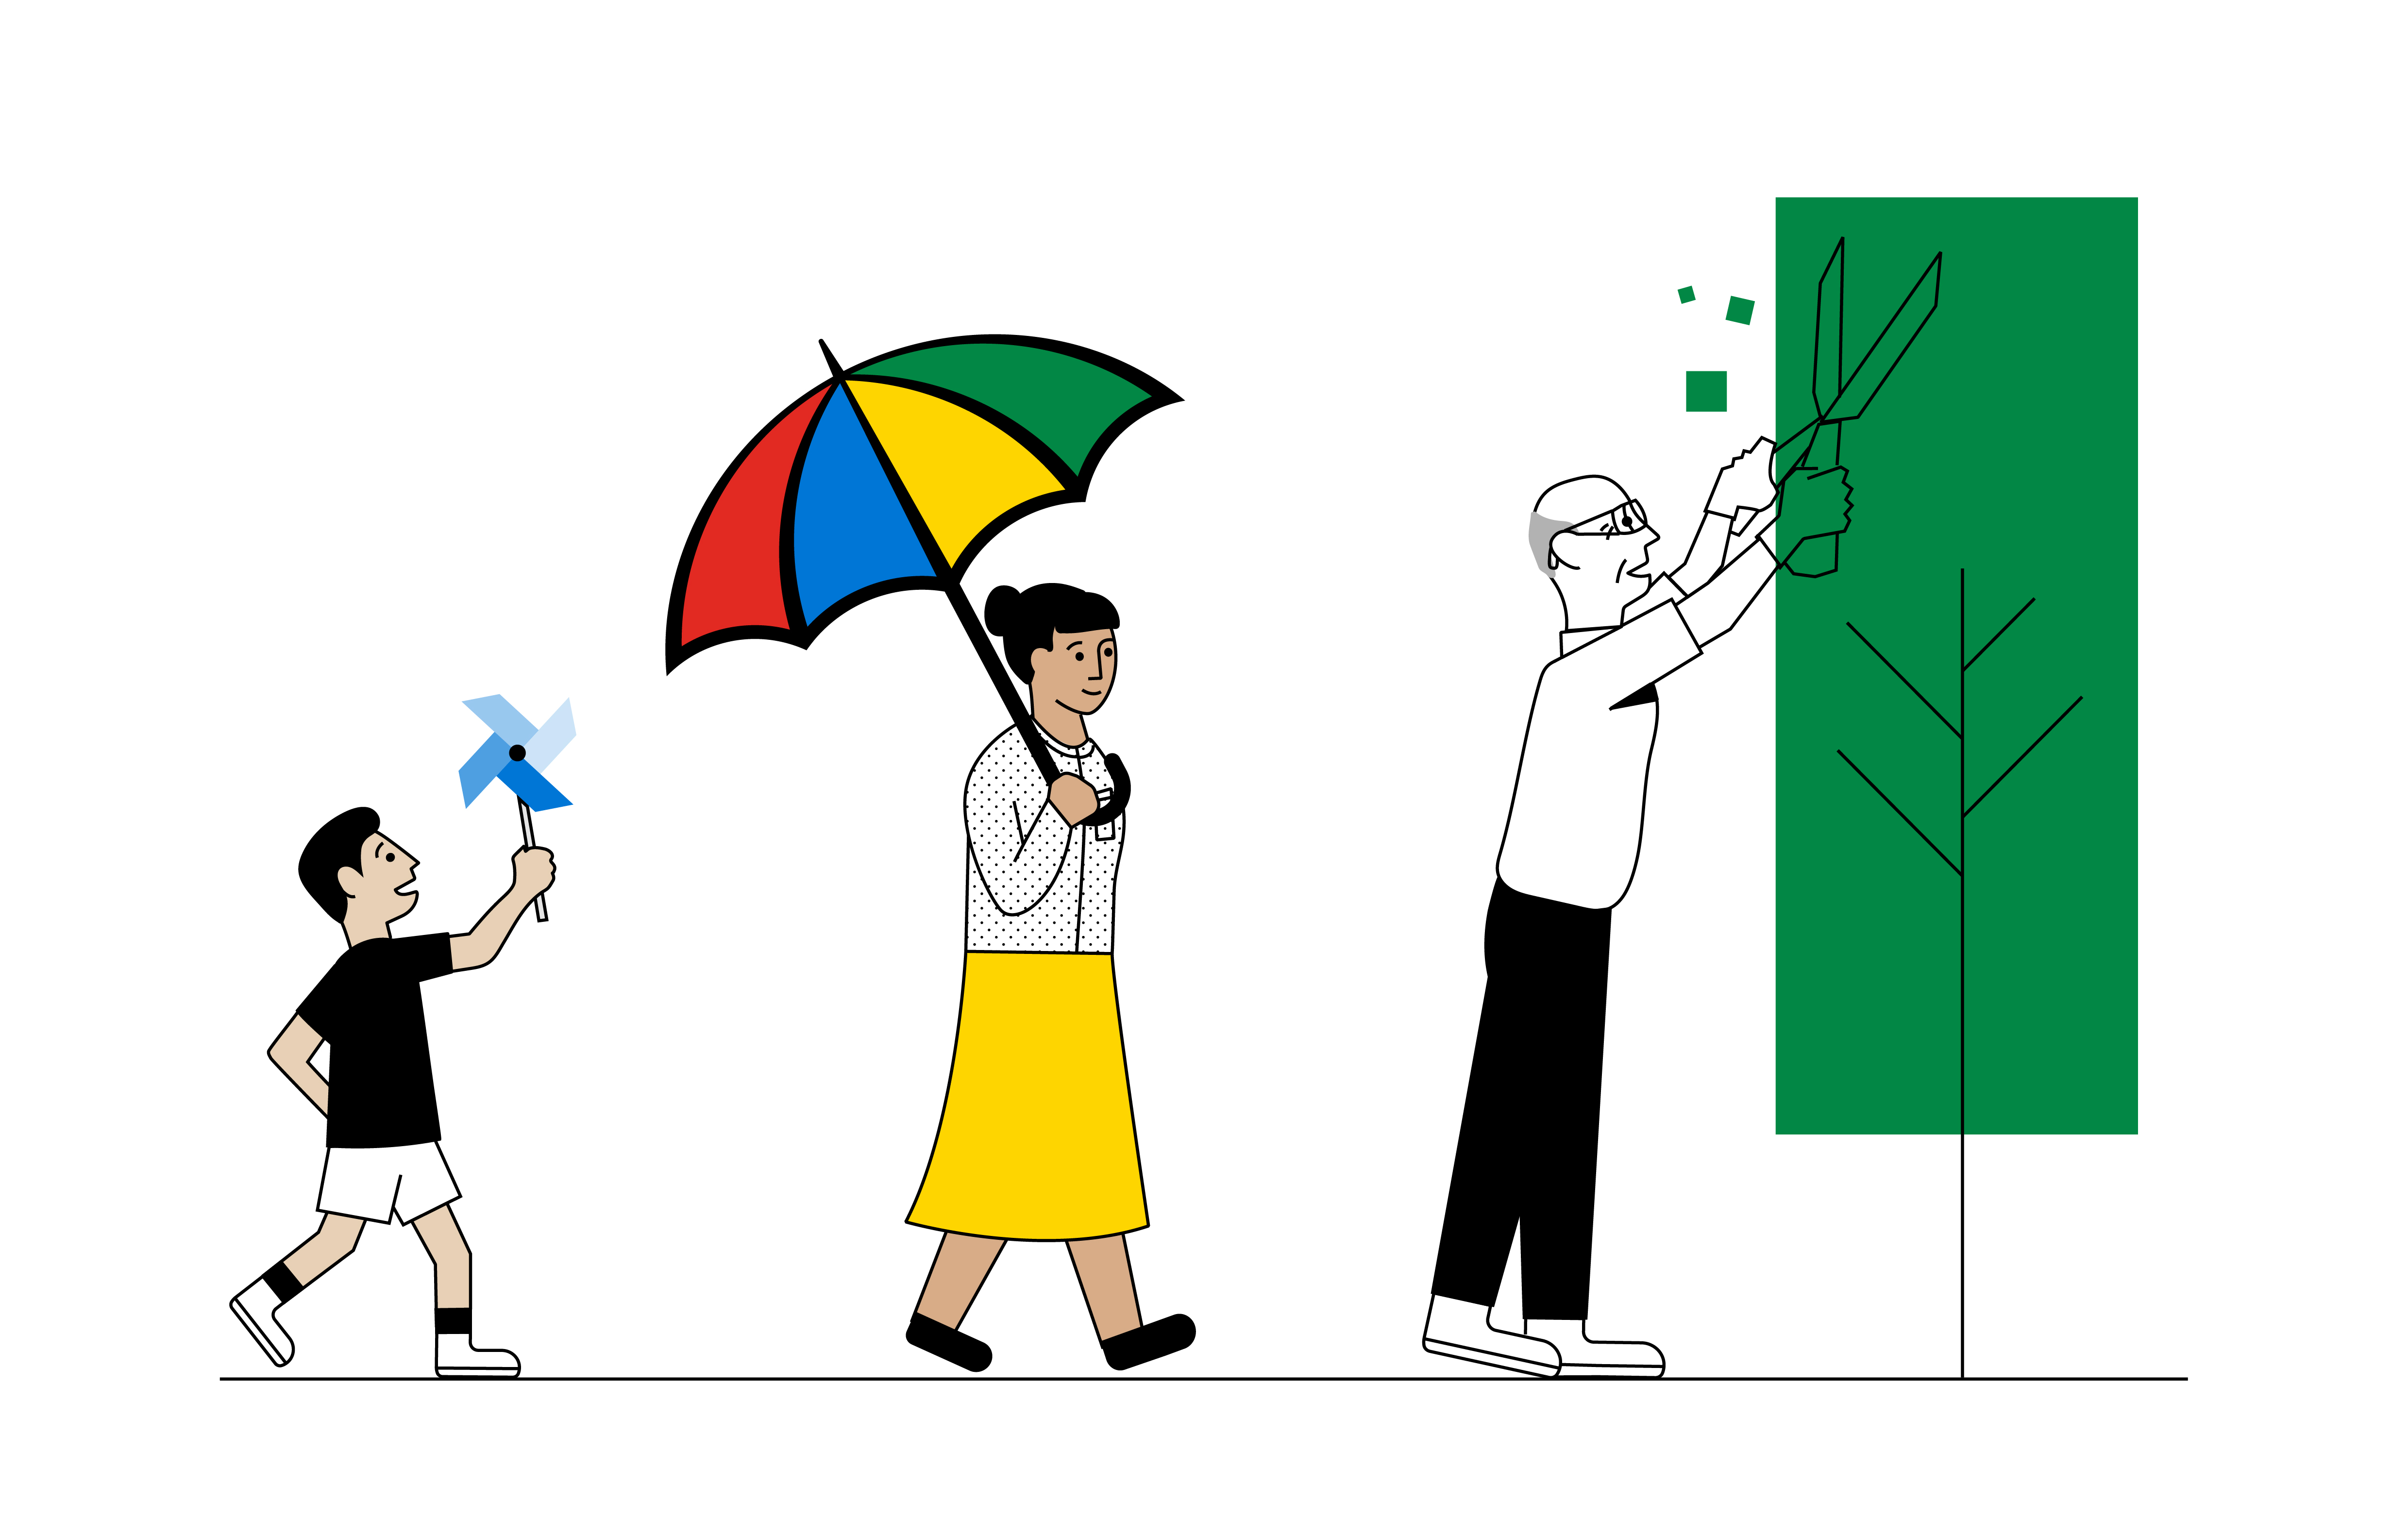 Illustration of child, woman with rainbow umbrella and a man cutting a tree